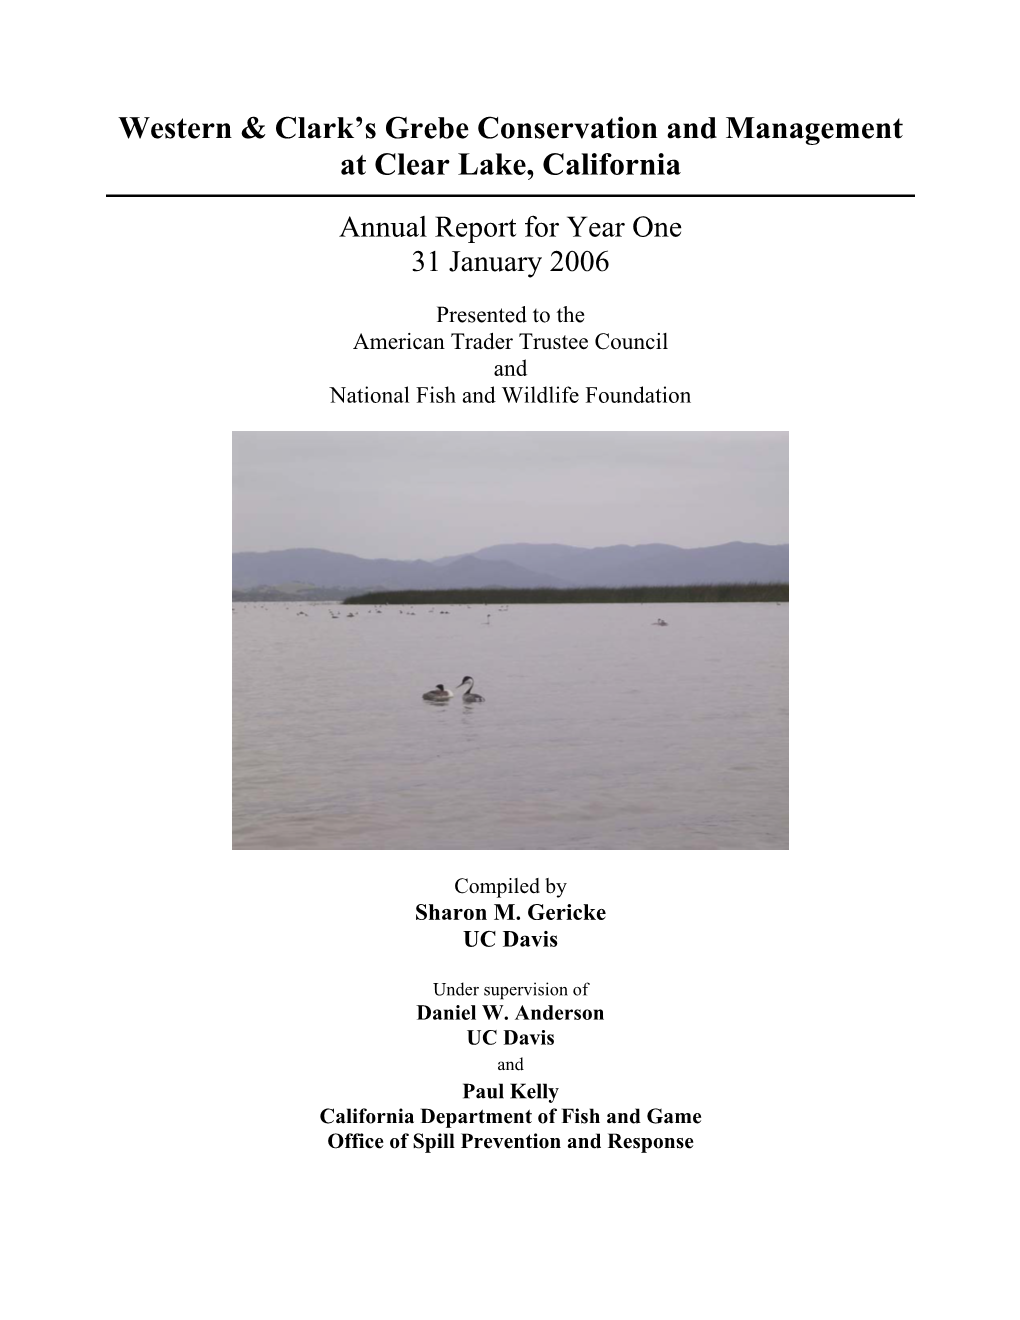 Western and Clark's Grebe Conservation and Management At